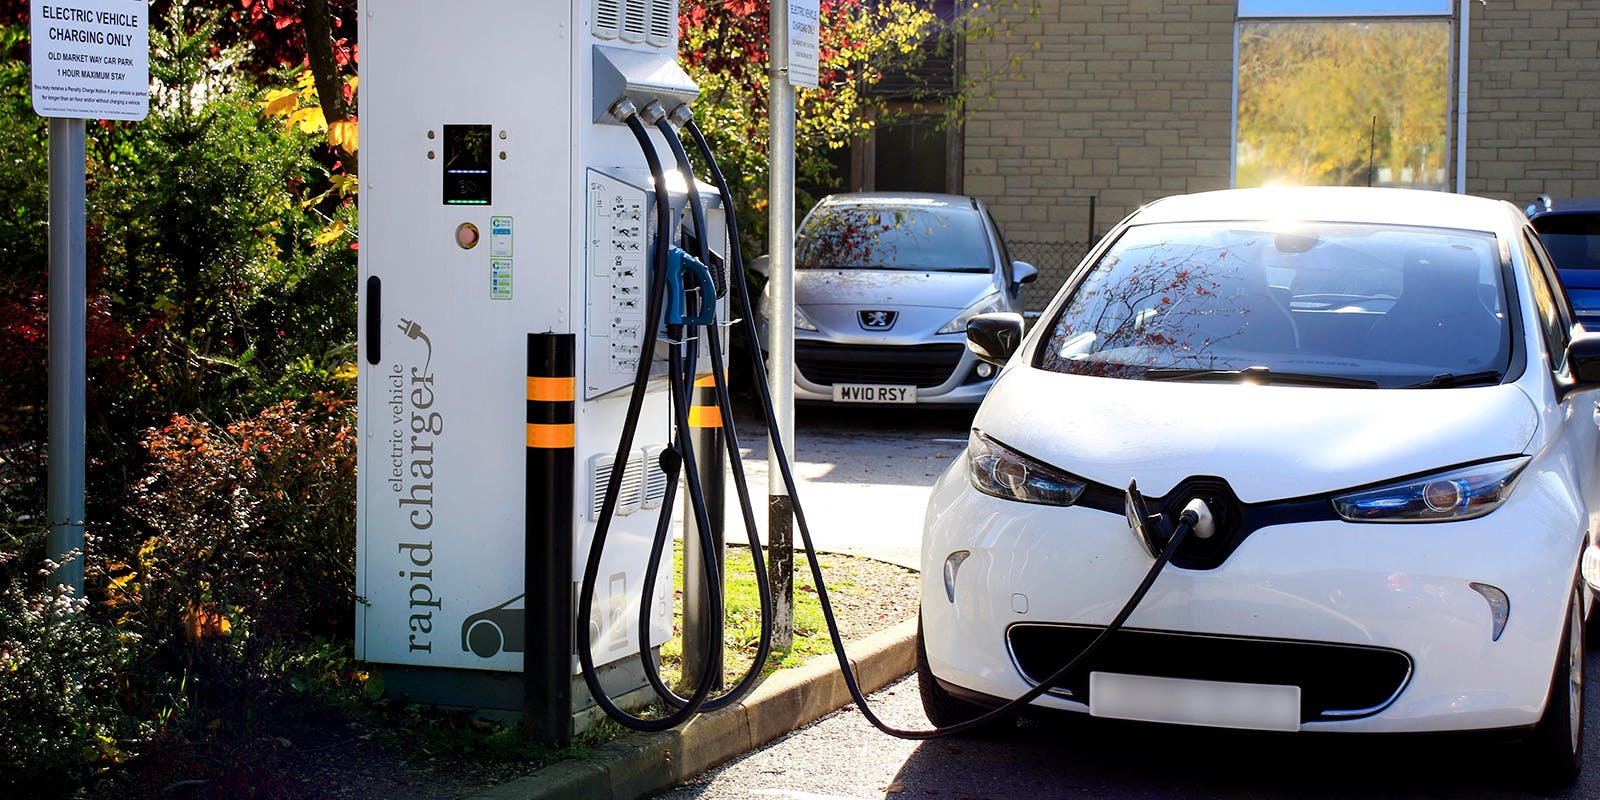 An EV charging point in the Cotswolds, England